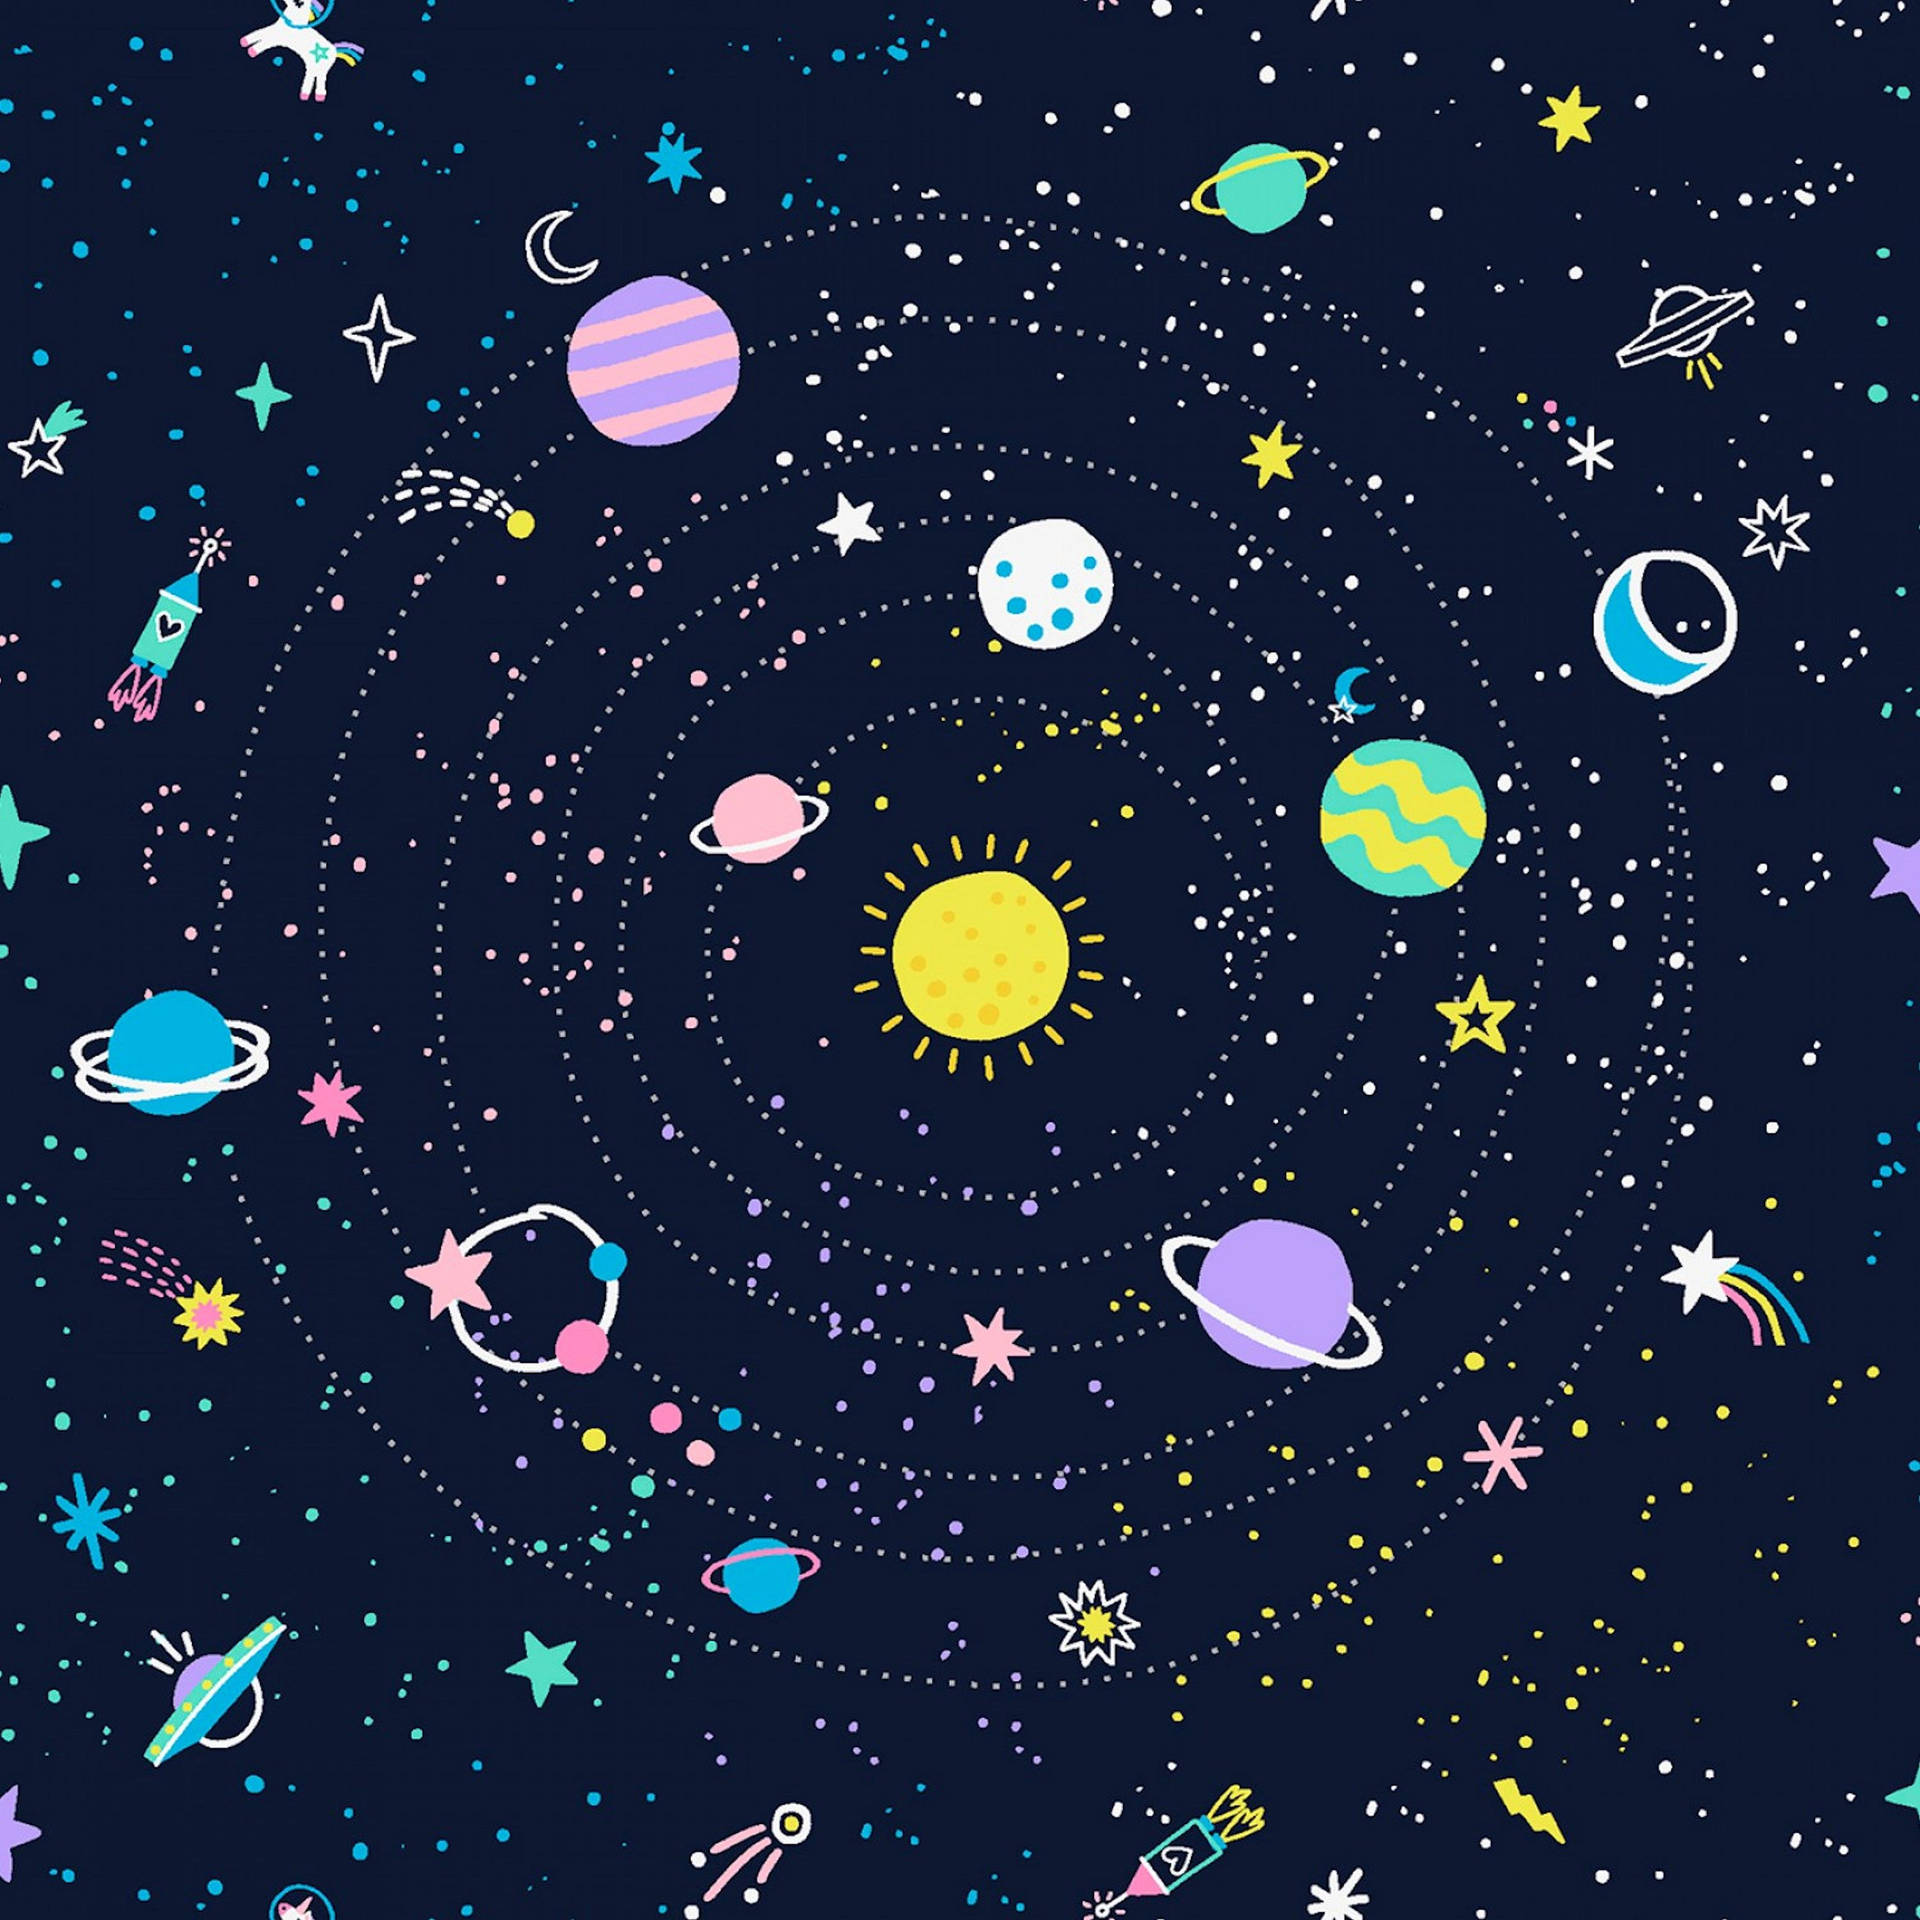 Download Aesthetic Outer Space Cartoon Art Wallpaper 